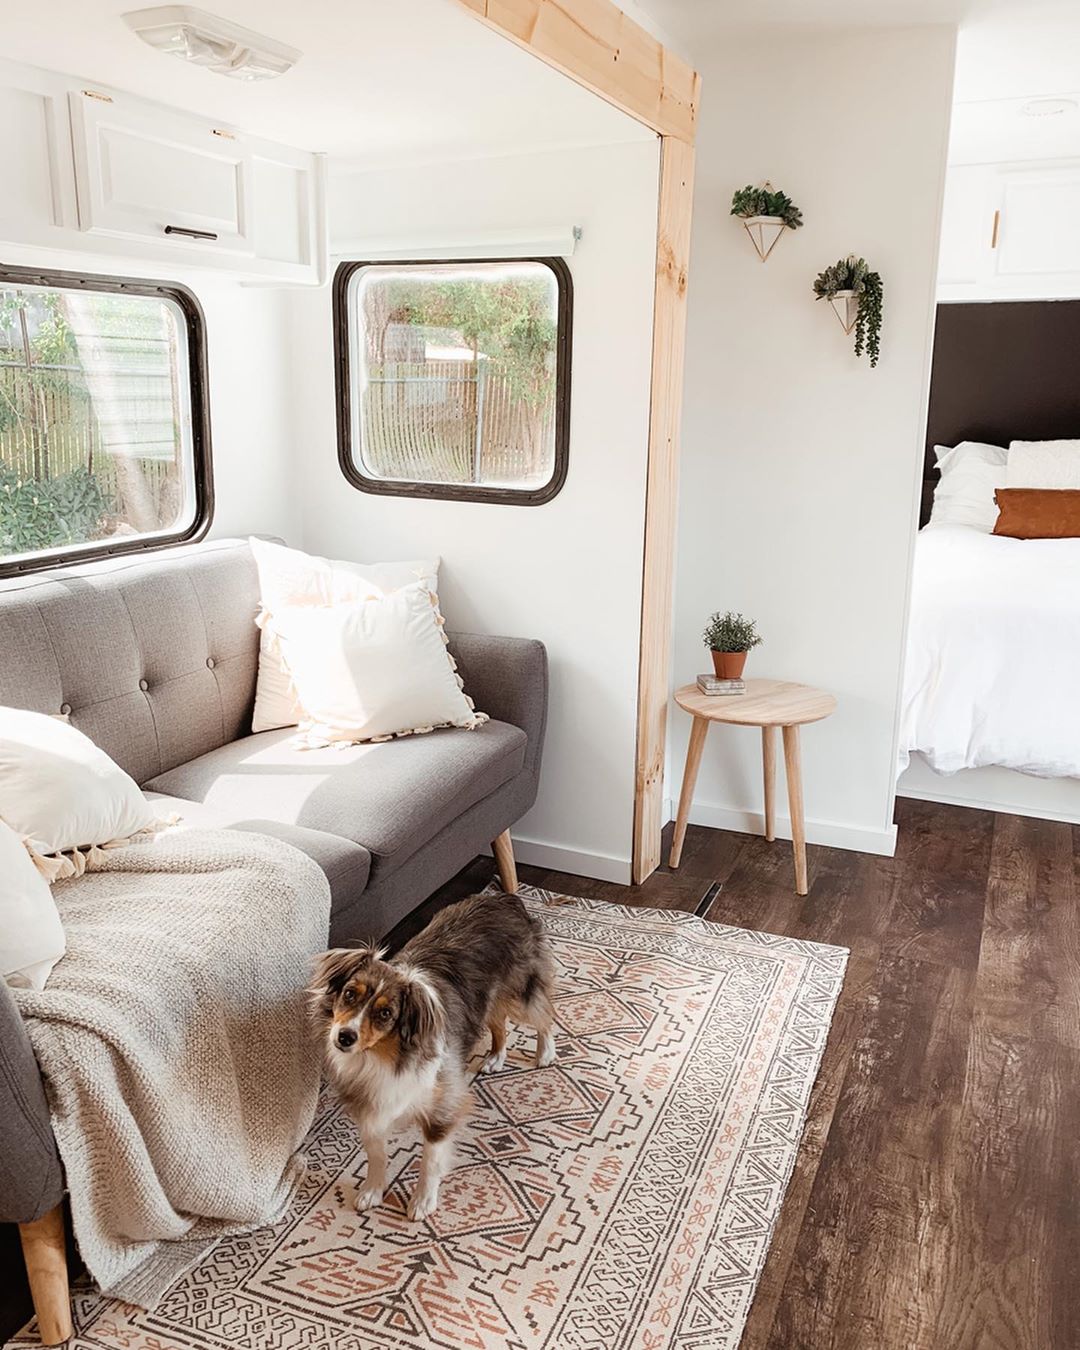 RV with new vinyl wood flooring and dog photo by Instagram user @danielvanhorn